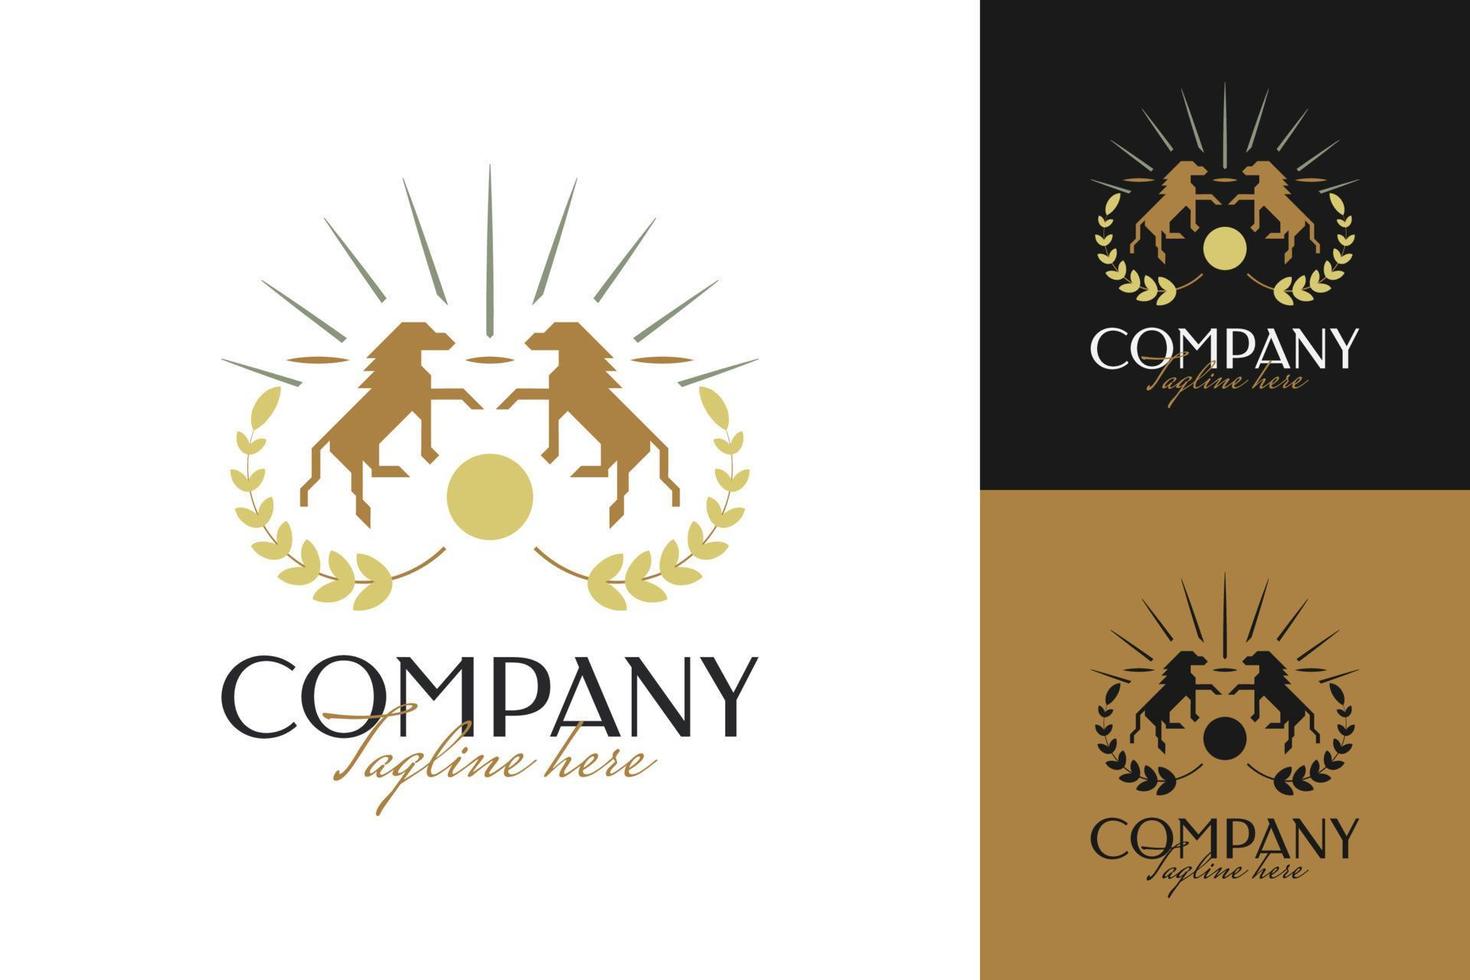 Elegant Horse Logo Design with Sun and Wheat Symbol. Two Horses in Vintage Style for Logo, Emblem, Insignia or Label vector